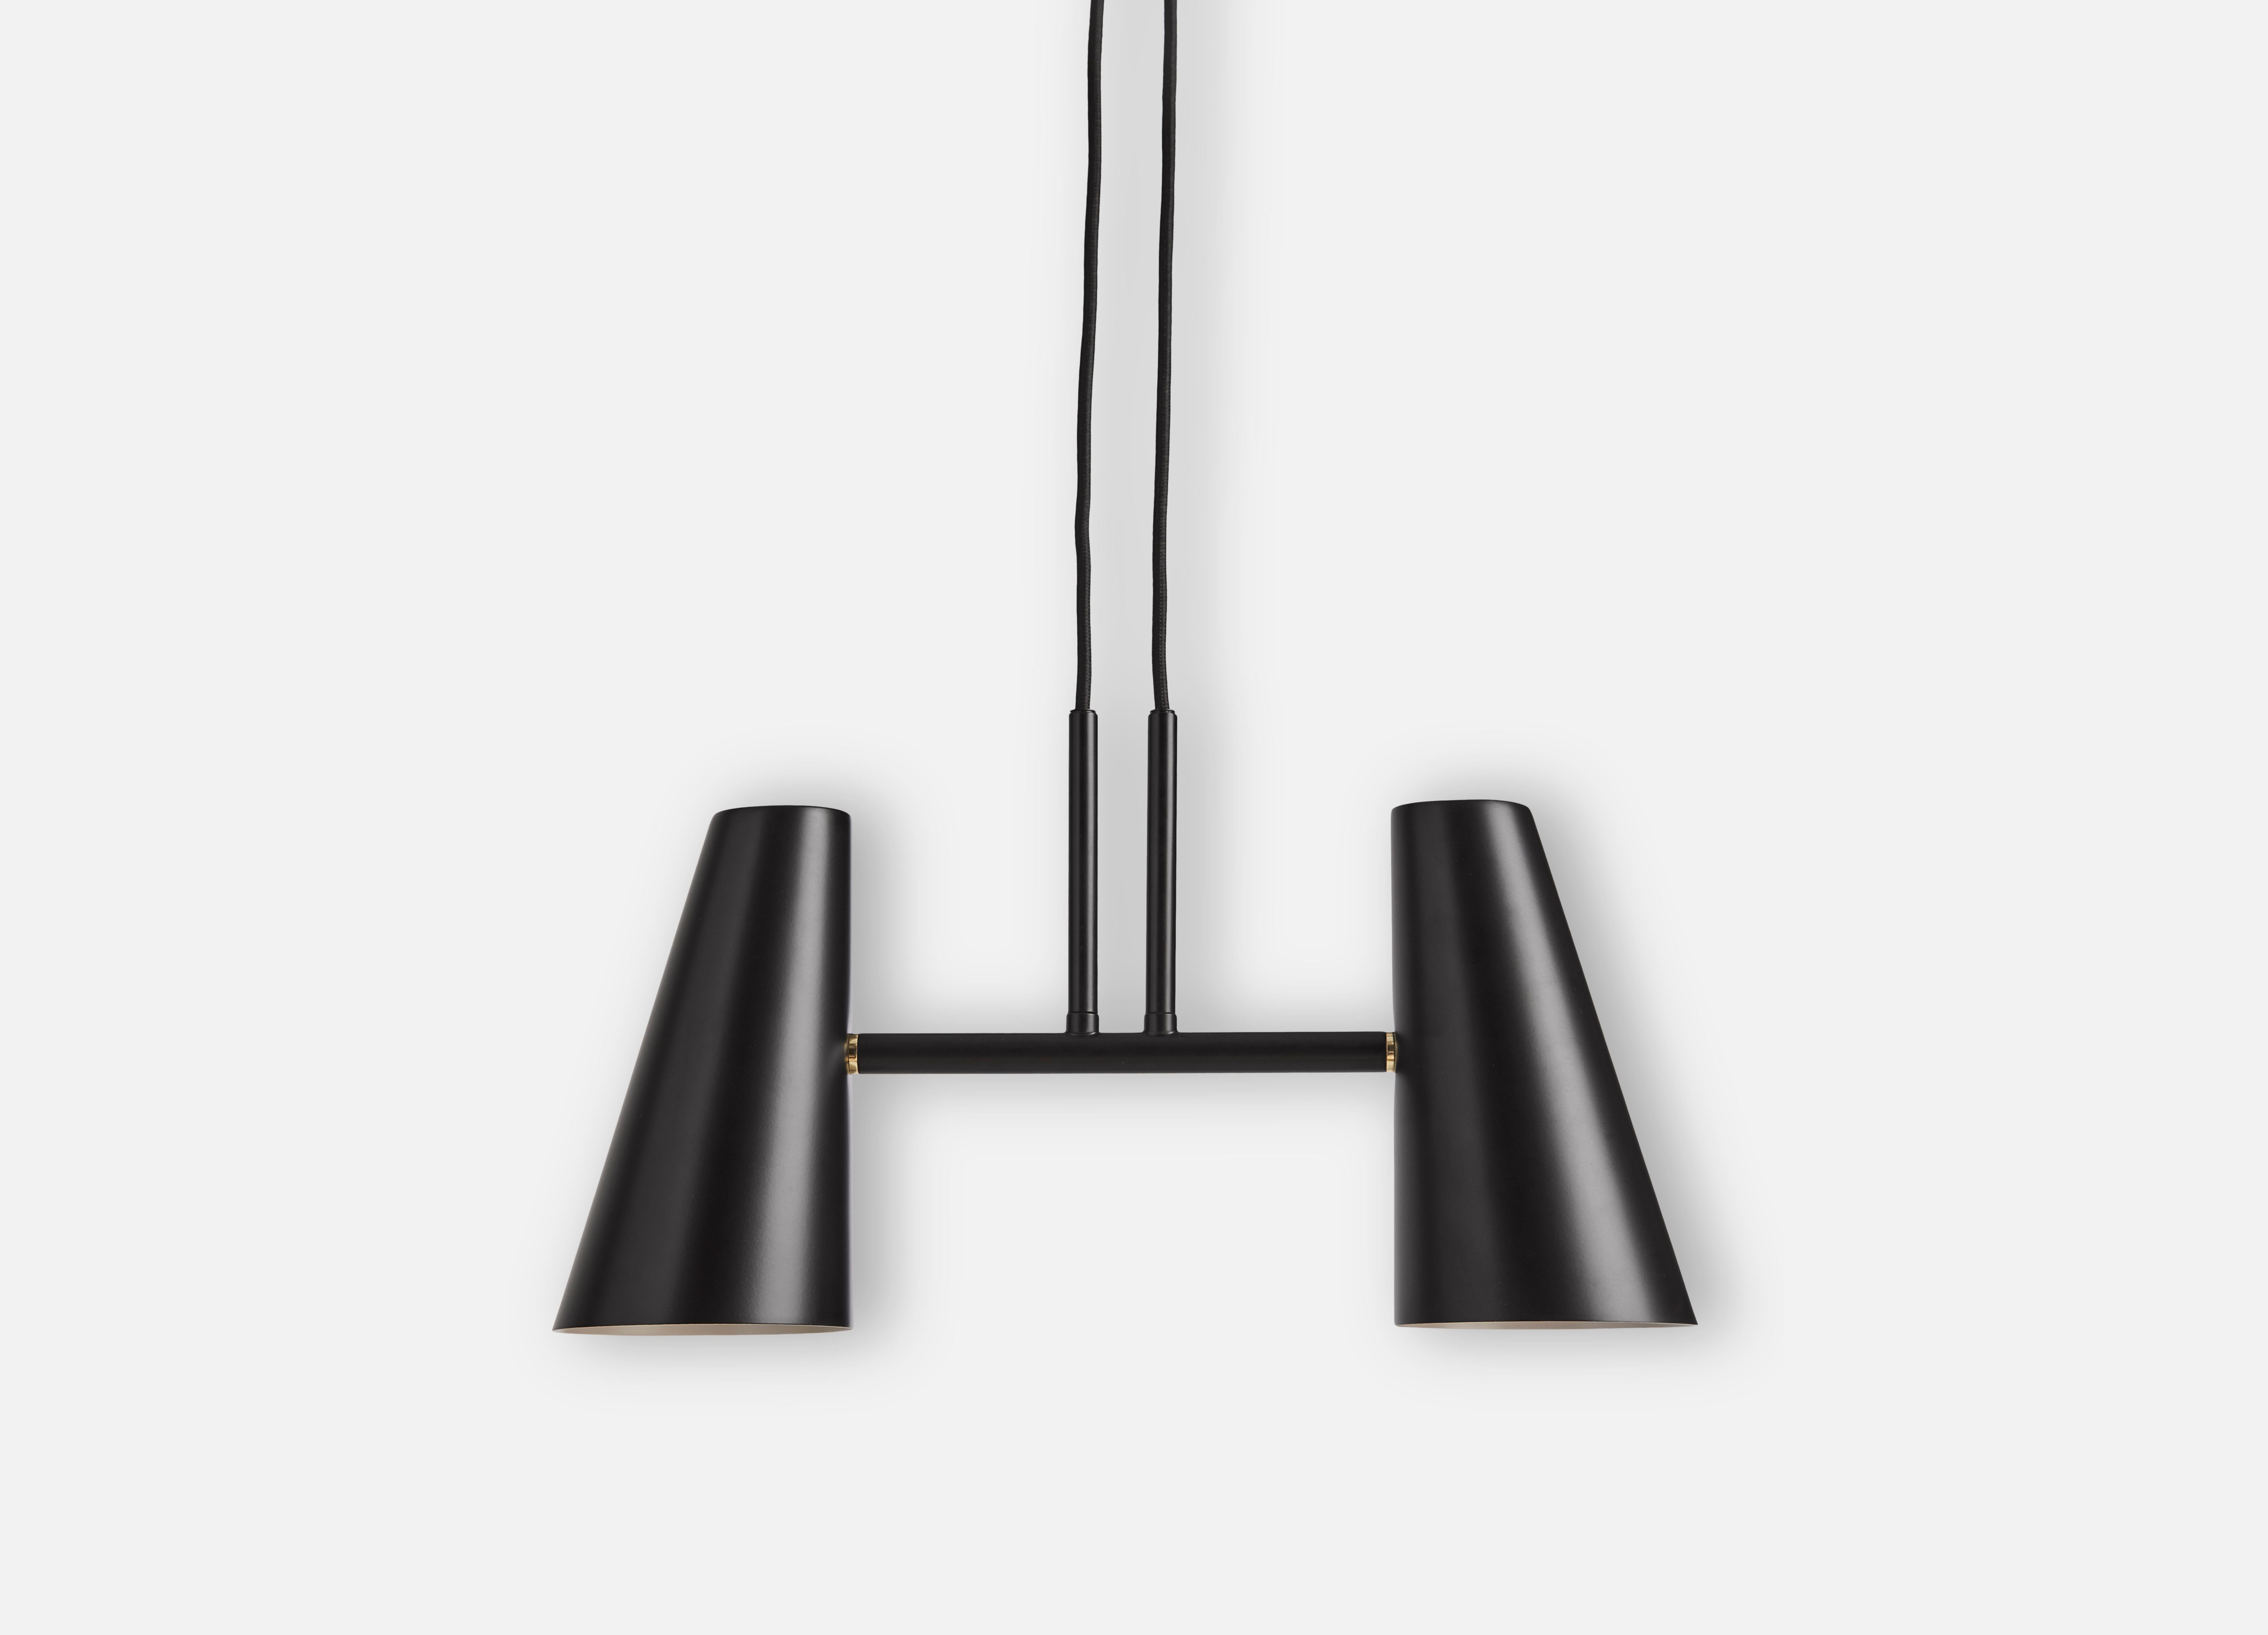 Cono 2 shades pendant lamp by Benny Frandsen.
Materials: Metal.
Dimensions: D 11 x W 42 x H 19.7 cm.

Benny Frandsen is a renowned and experienced danish designer and founder of the lighting company frandsen, which has designed, manufactured and